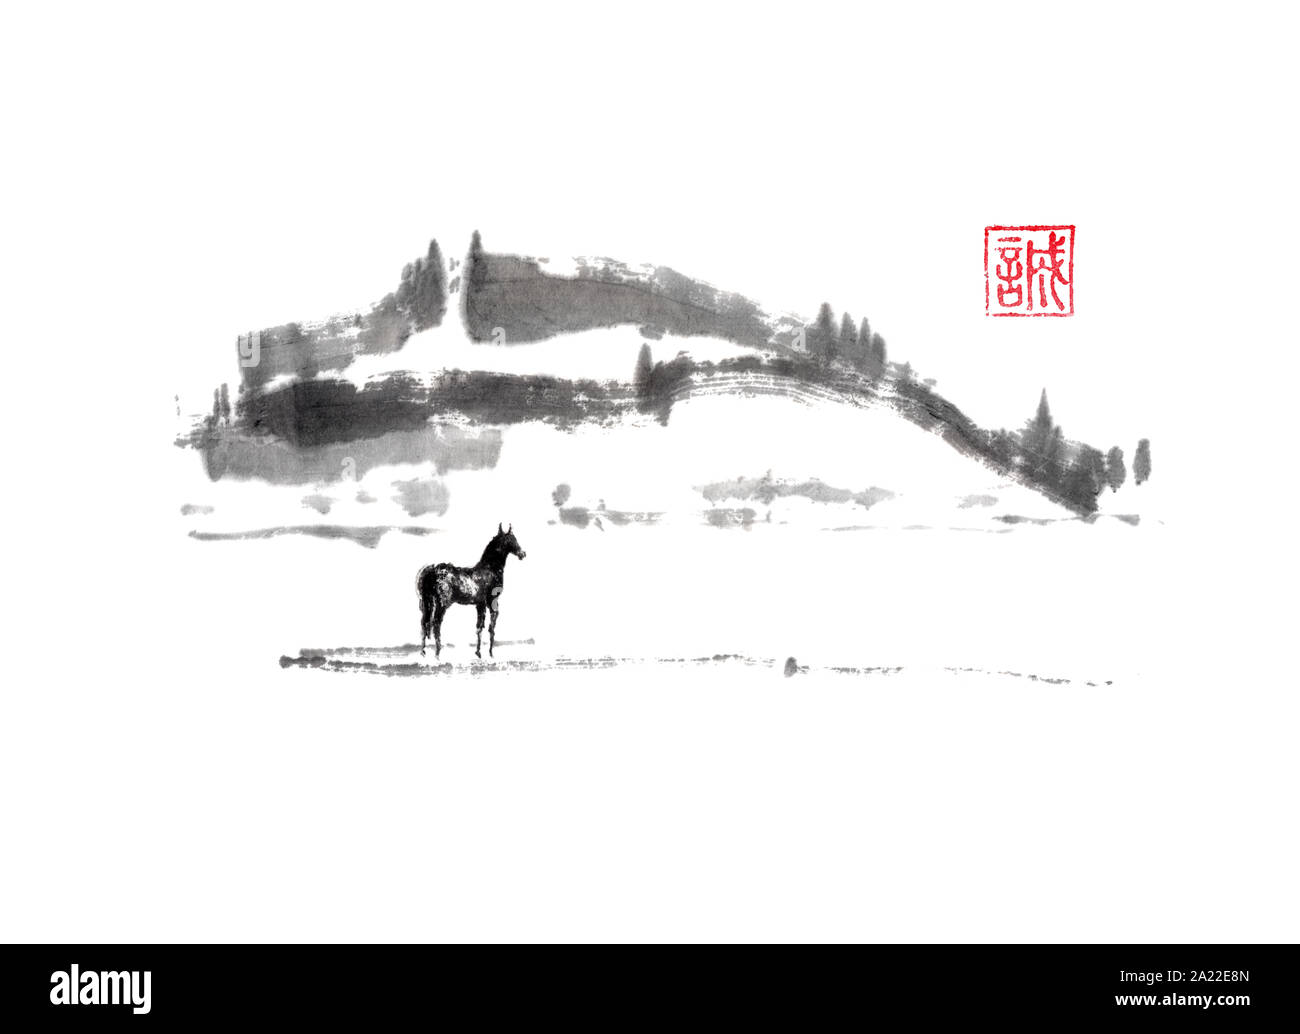 Horse and distant hills Japanese style original sumi-e ink painting. Hieroglyph featured means sincerity. Great for wall art, greeting cards, or textu Stock Photo